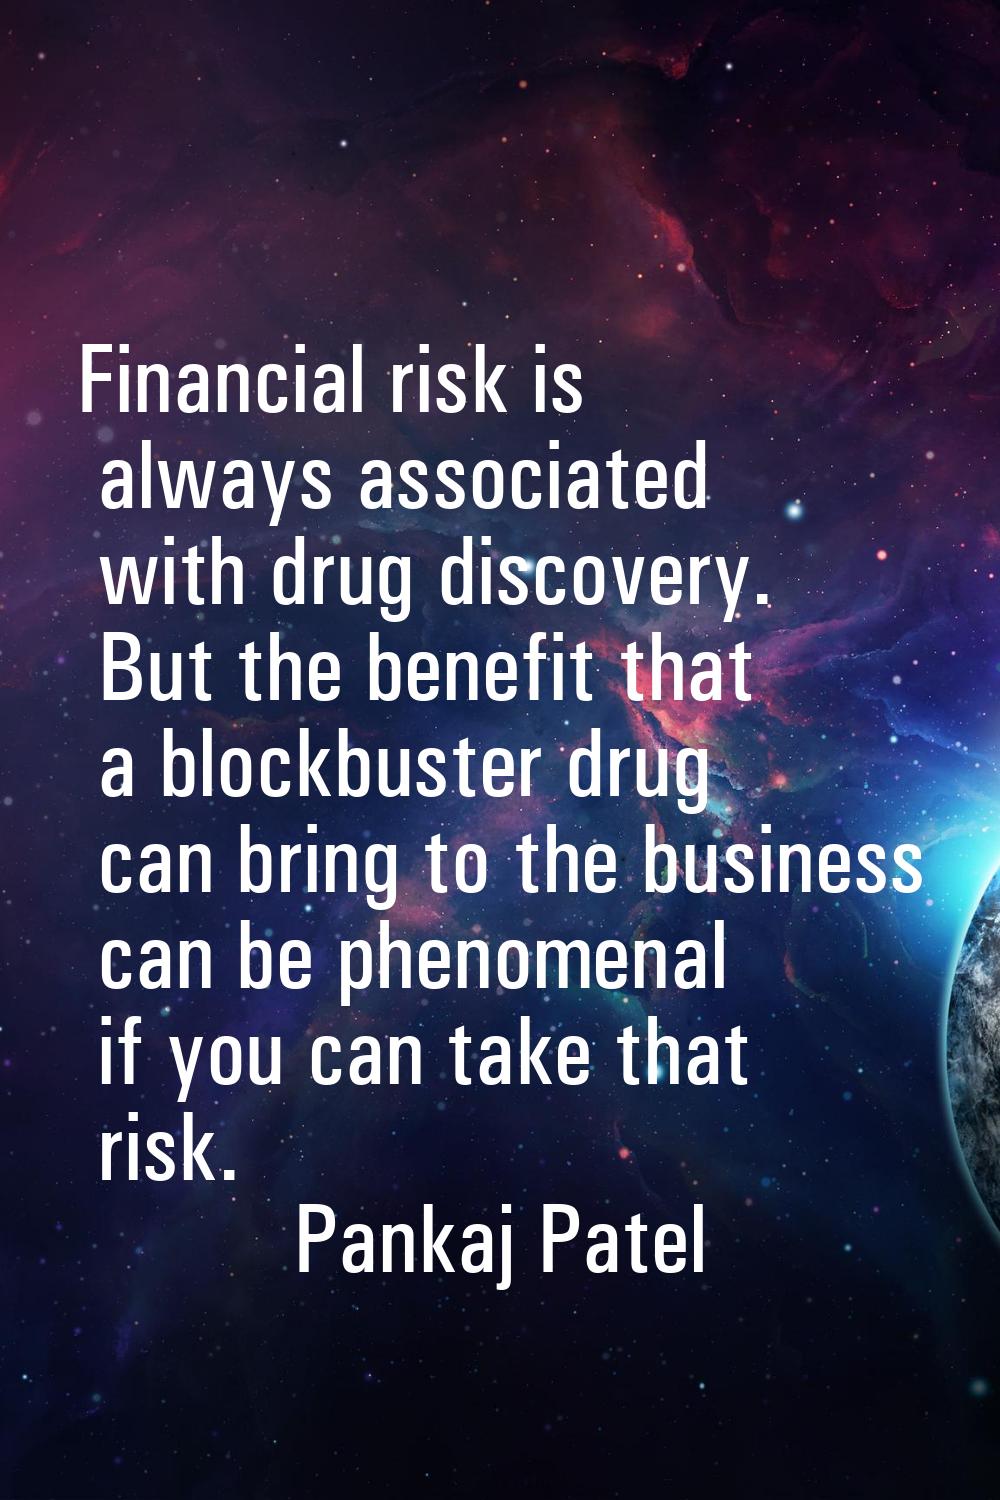 Financial risk is always associated with drug discovery. But the benefit that a blockbuster drug ca